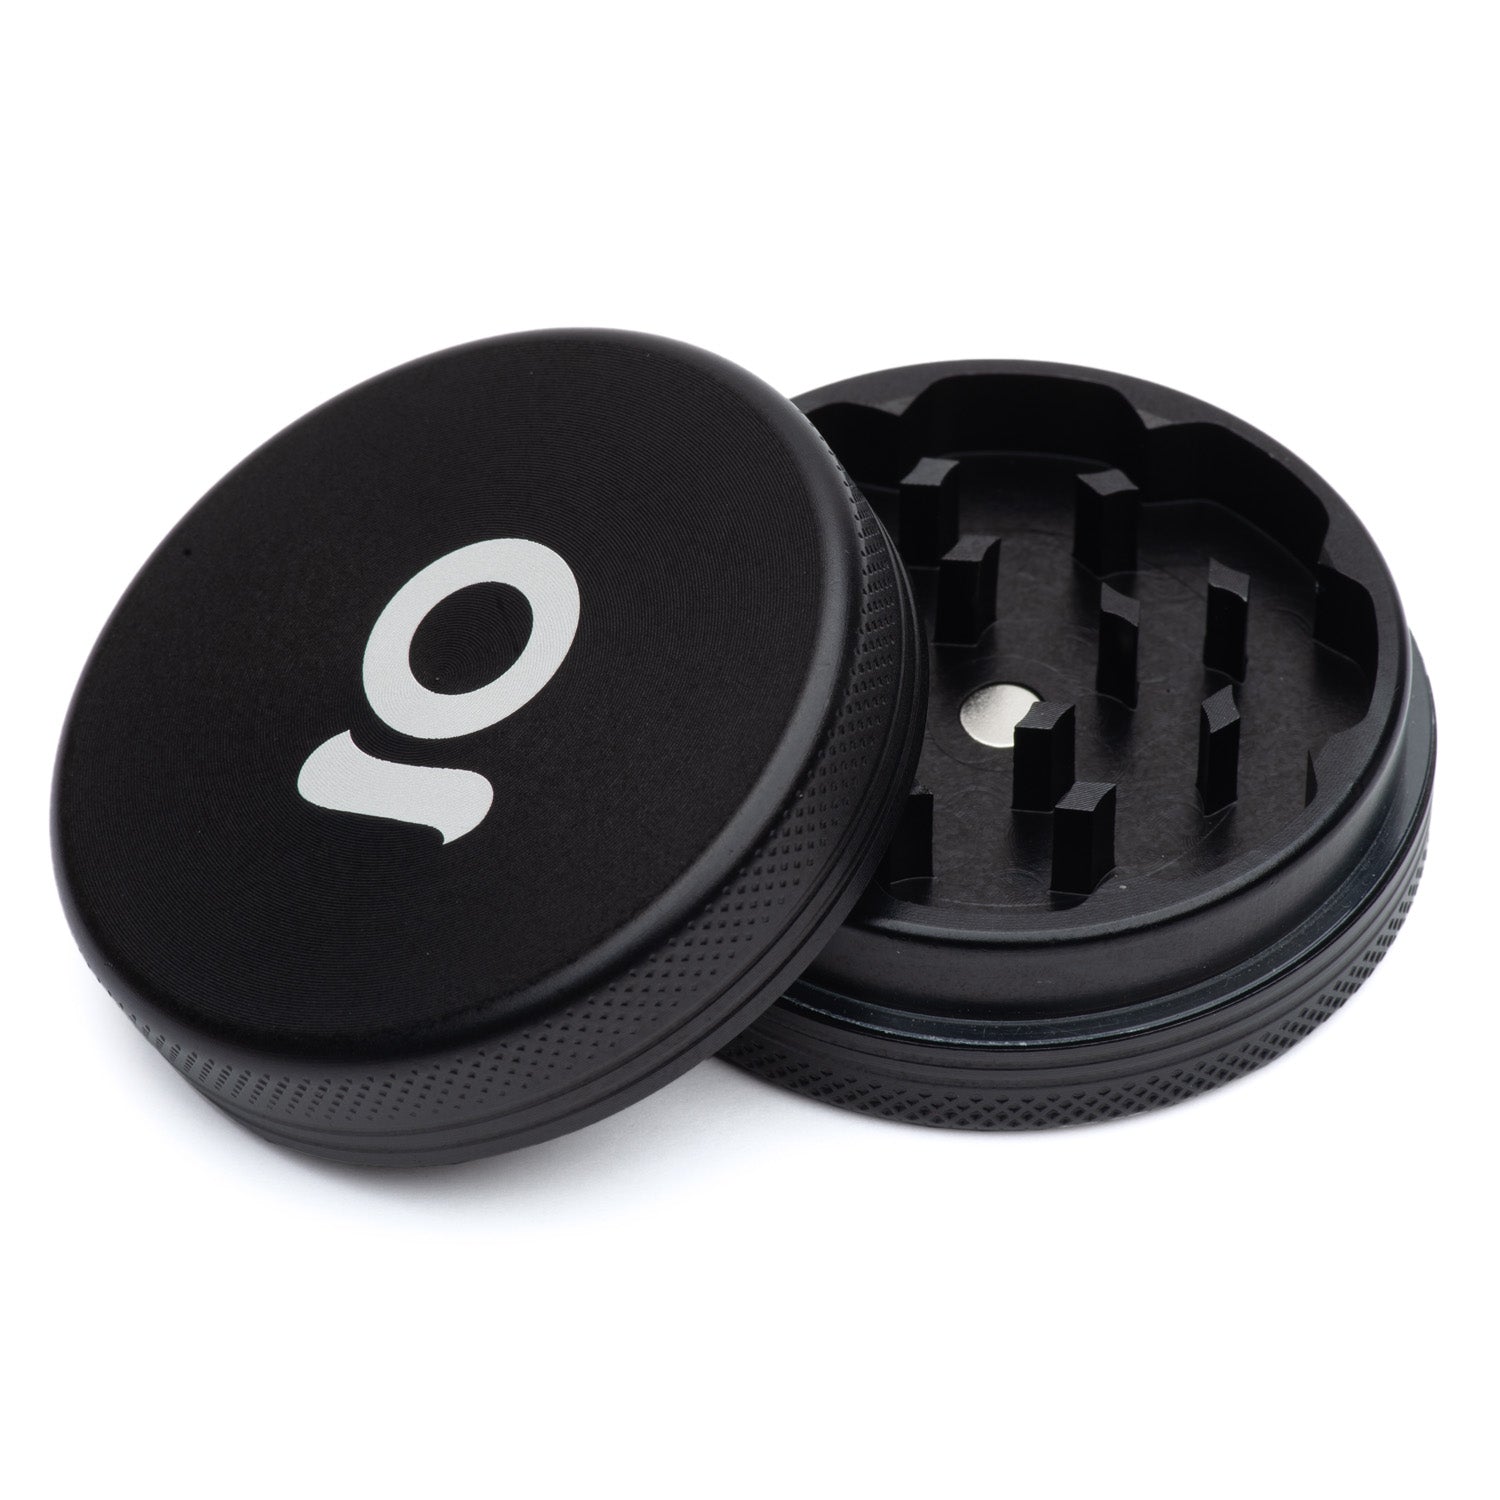 Ongrok 2-Piece Metal Grinder by Ongrok | Mission Dispensary